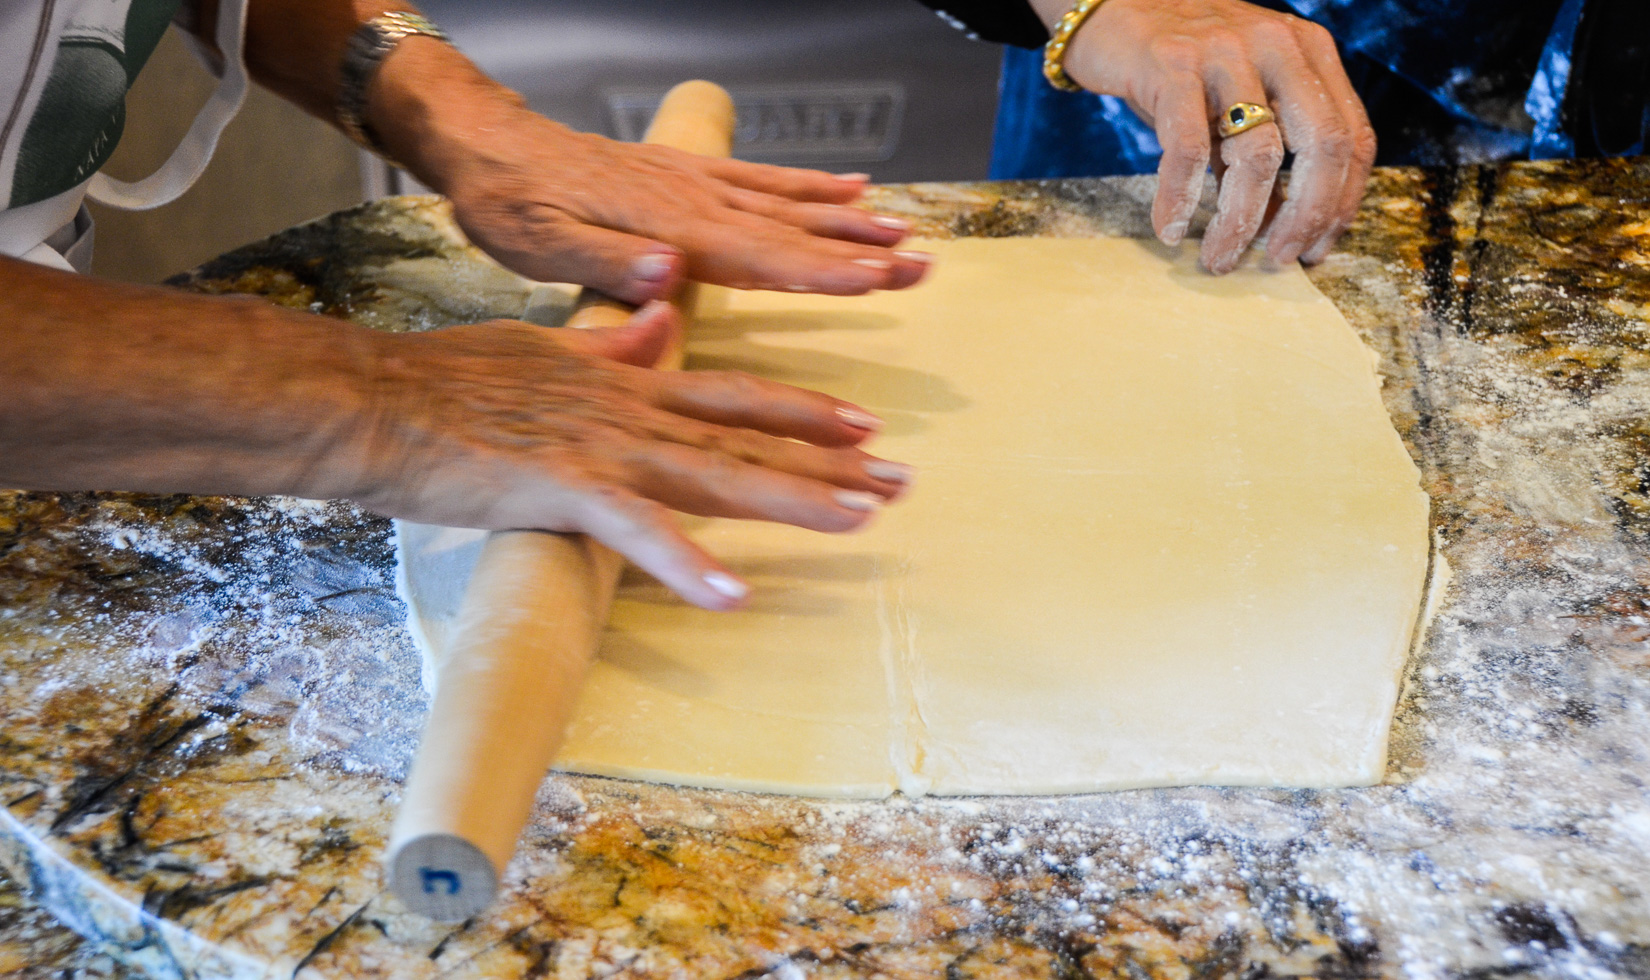 Rolling dough at Napa cooking class